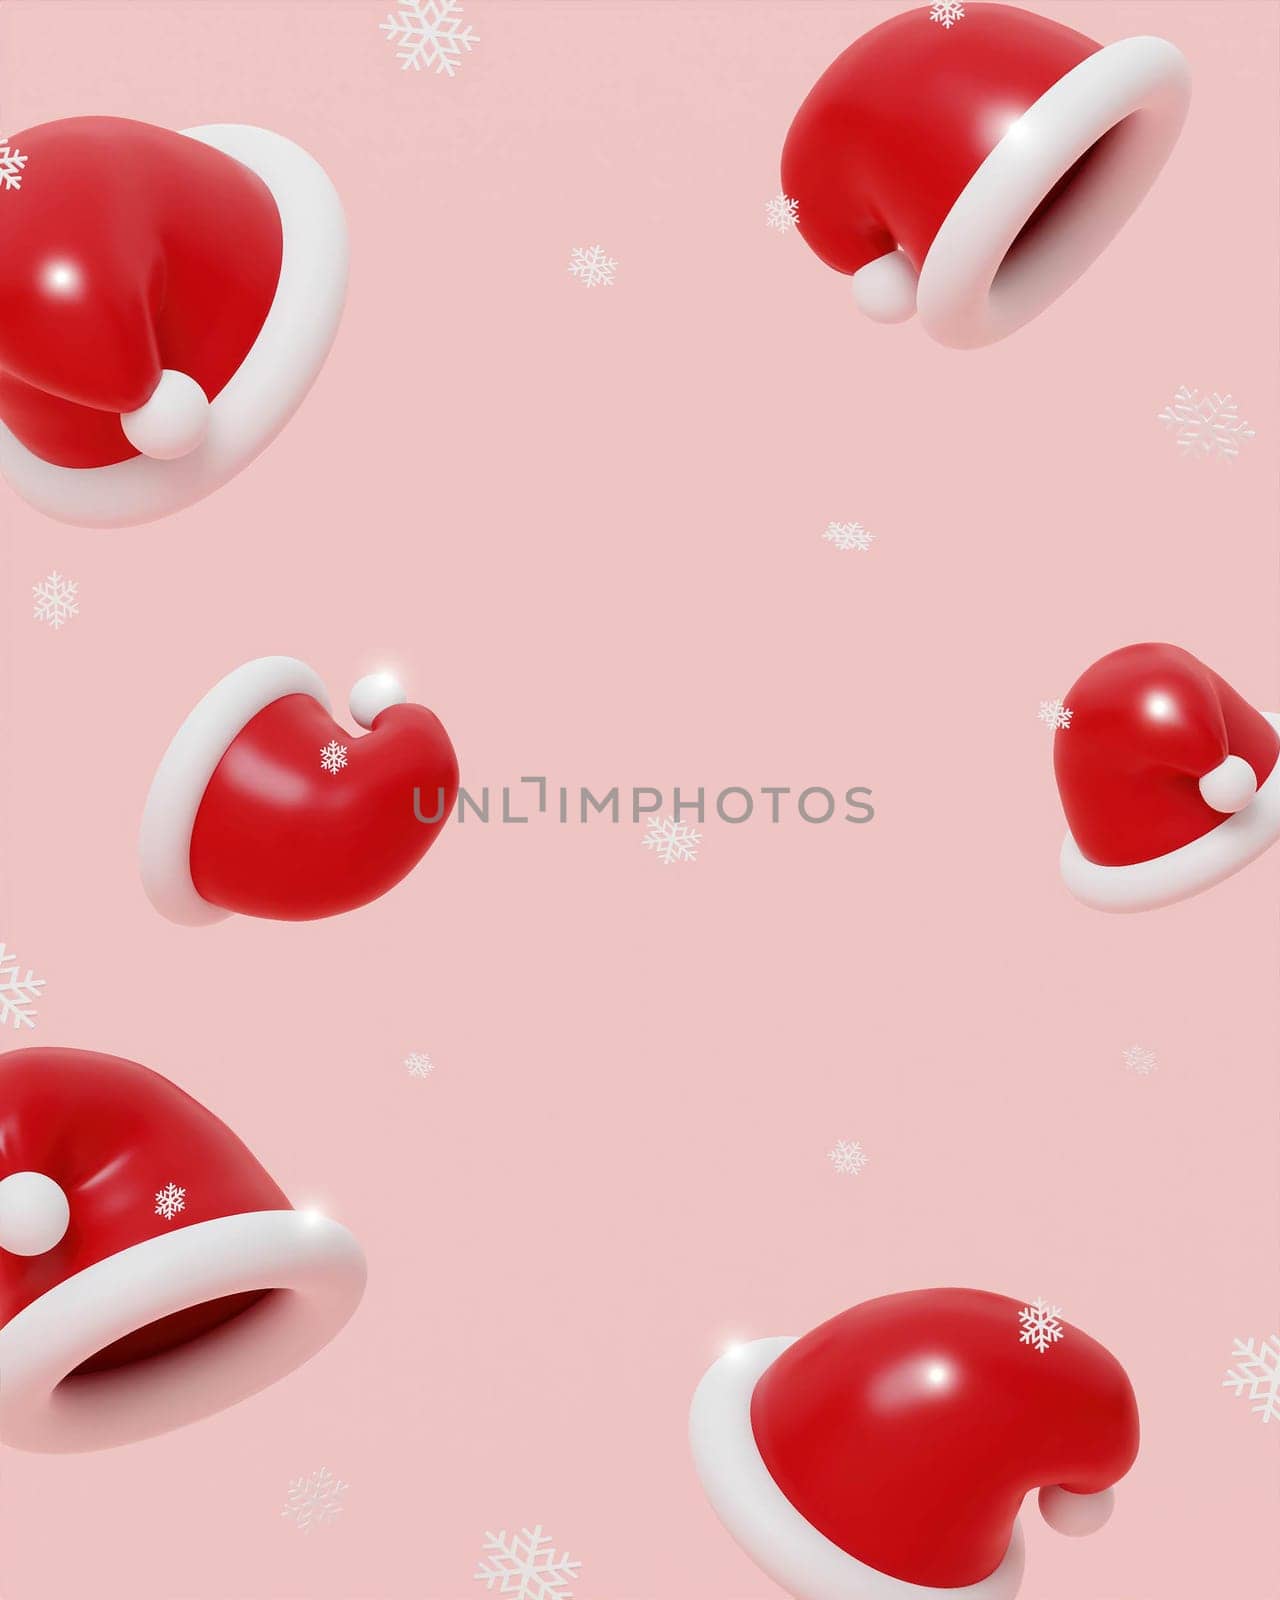 Merry Christmas and Happy New Year. Xmas Background design, Christmas hat and snow float on pink background. Greeting banner template. Winter holidays forest. 3d render by meepiangraphic